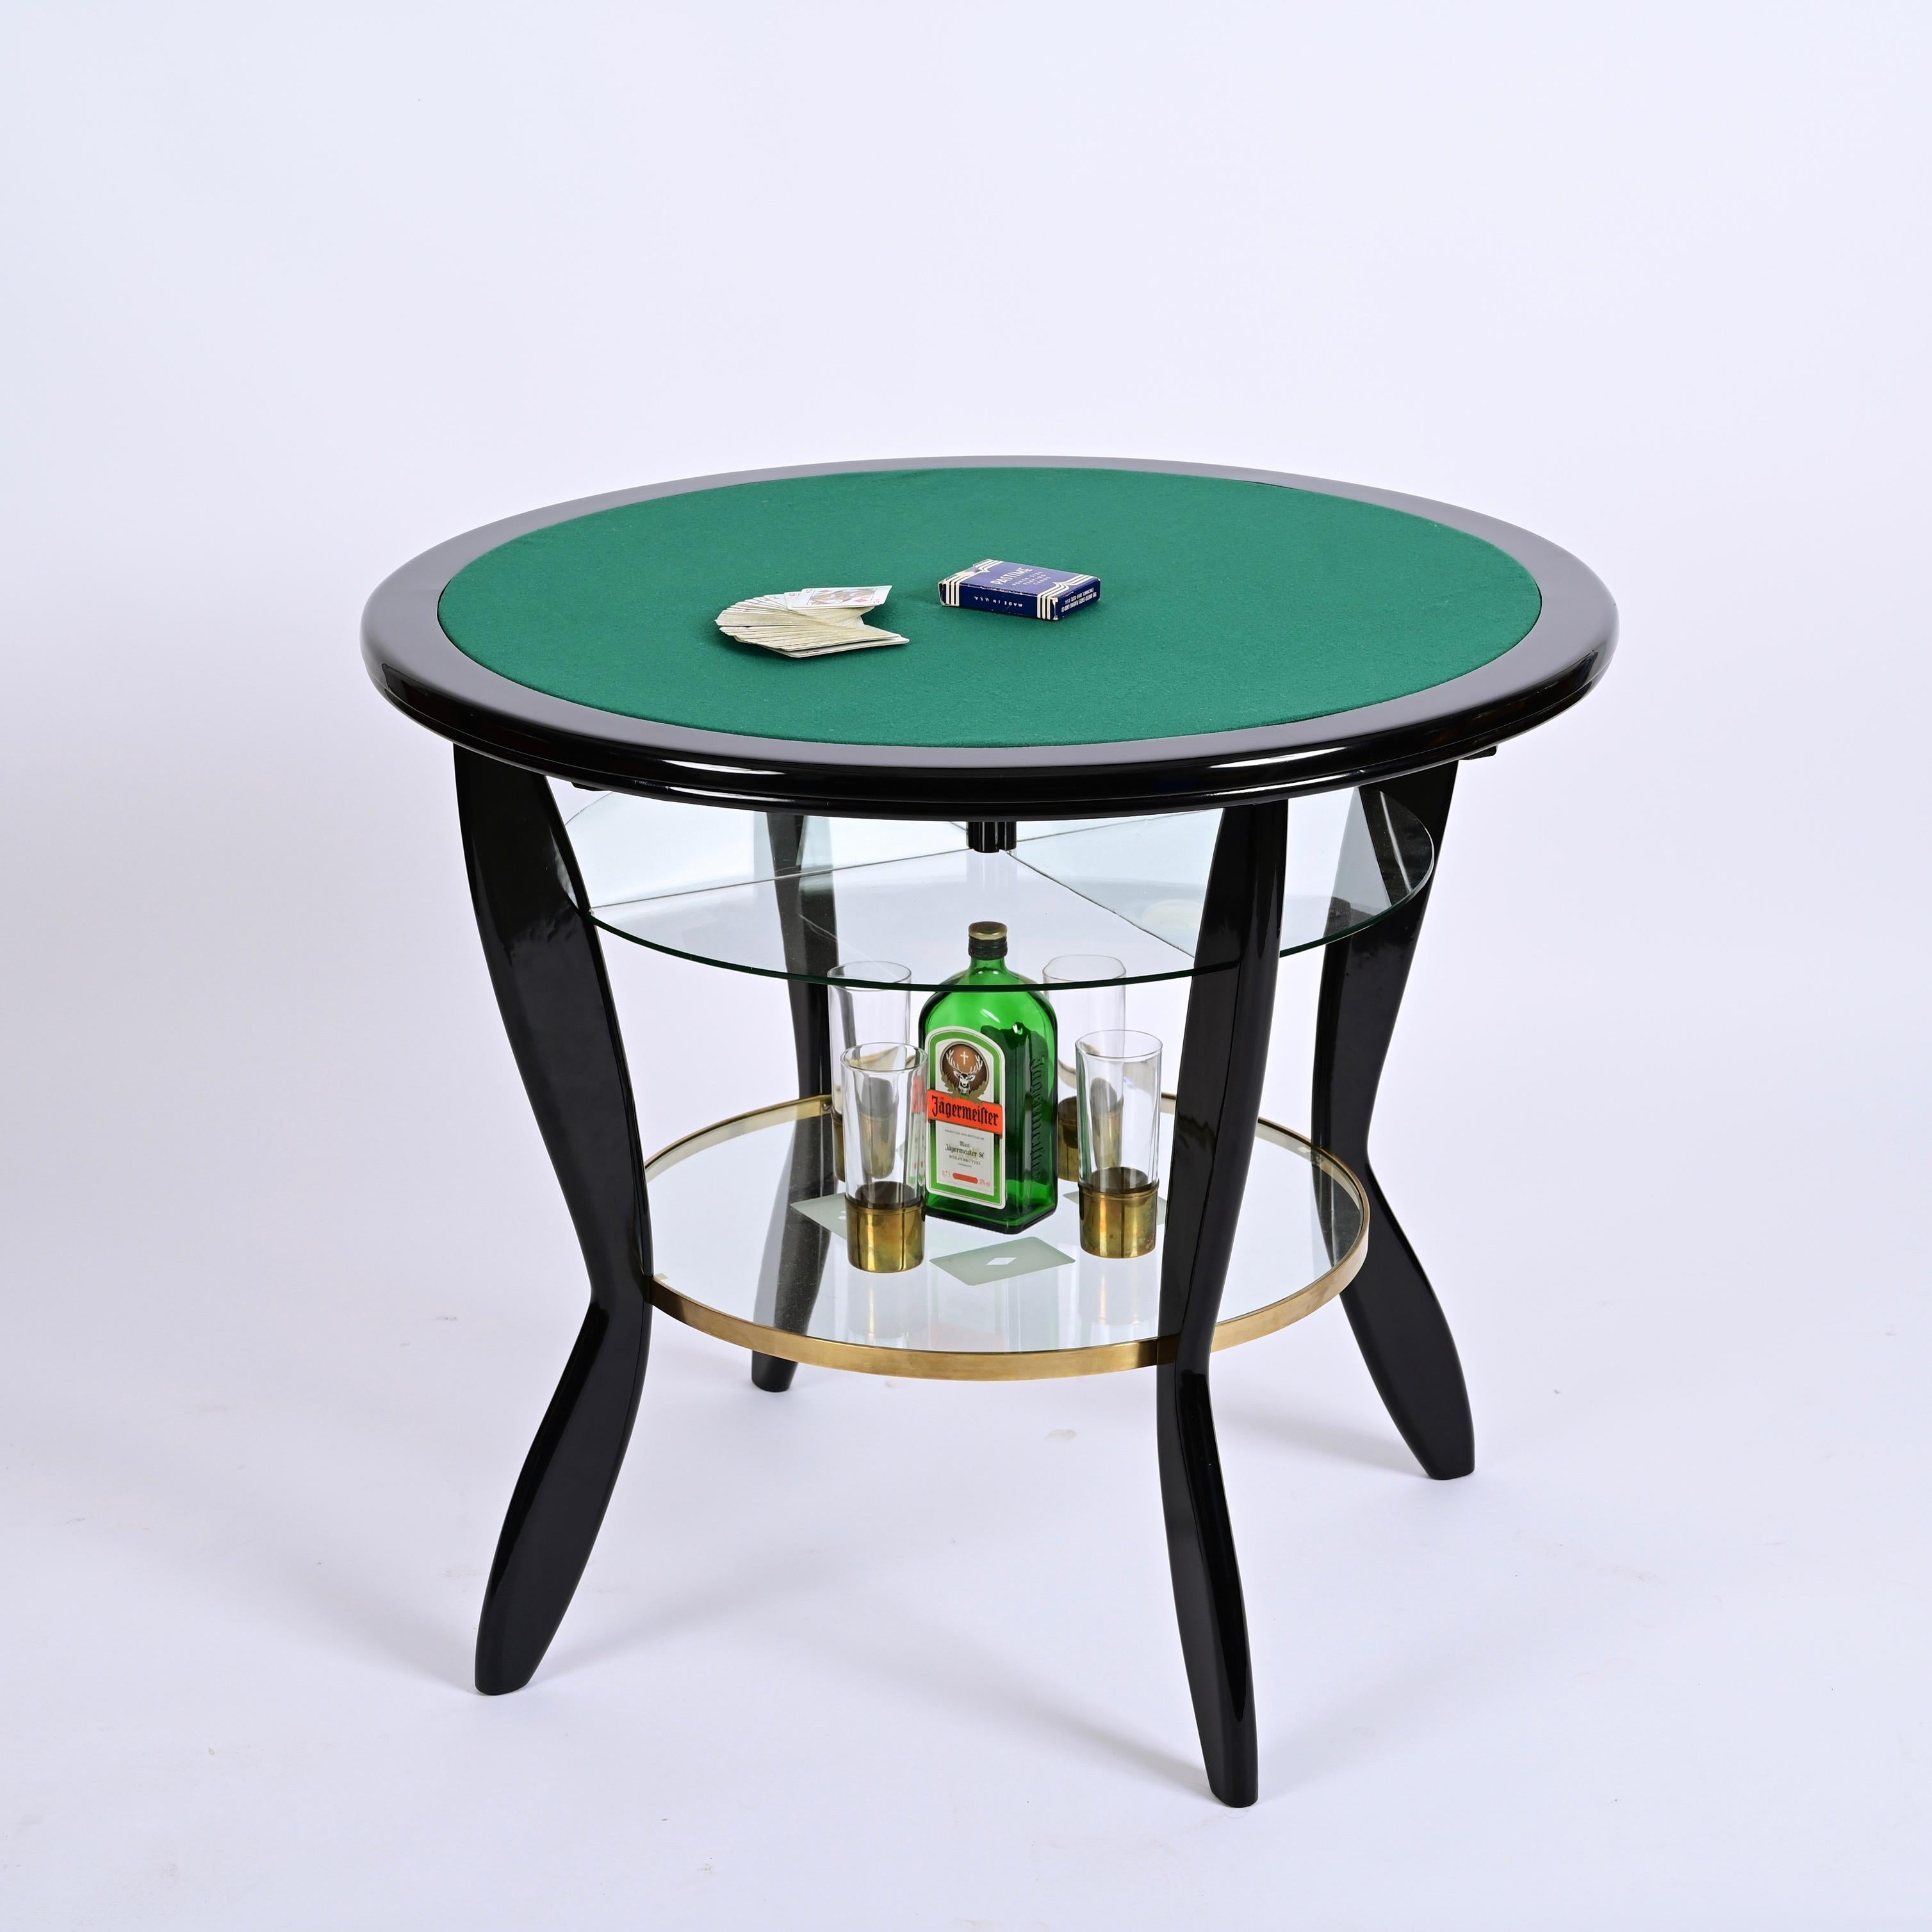 Gio Ponti Style Ebonized Beech and Brass Italian Game Table with Glass, 1950s For Sale 7